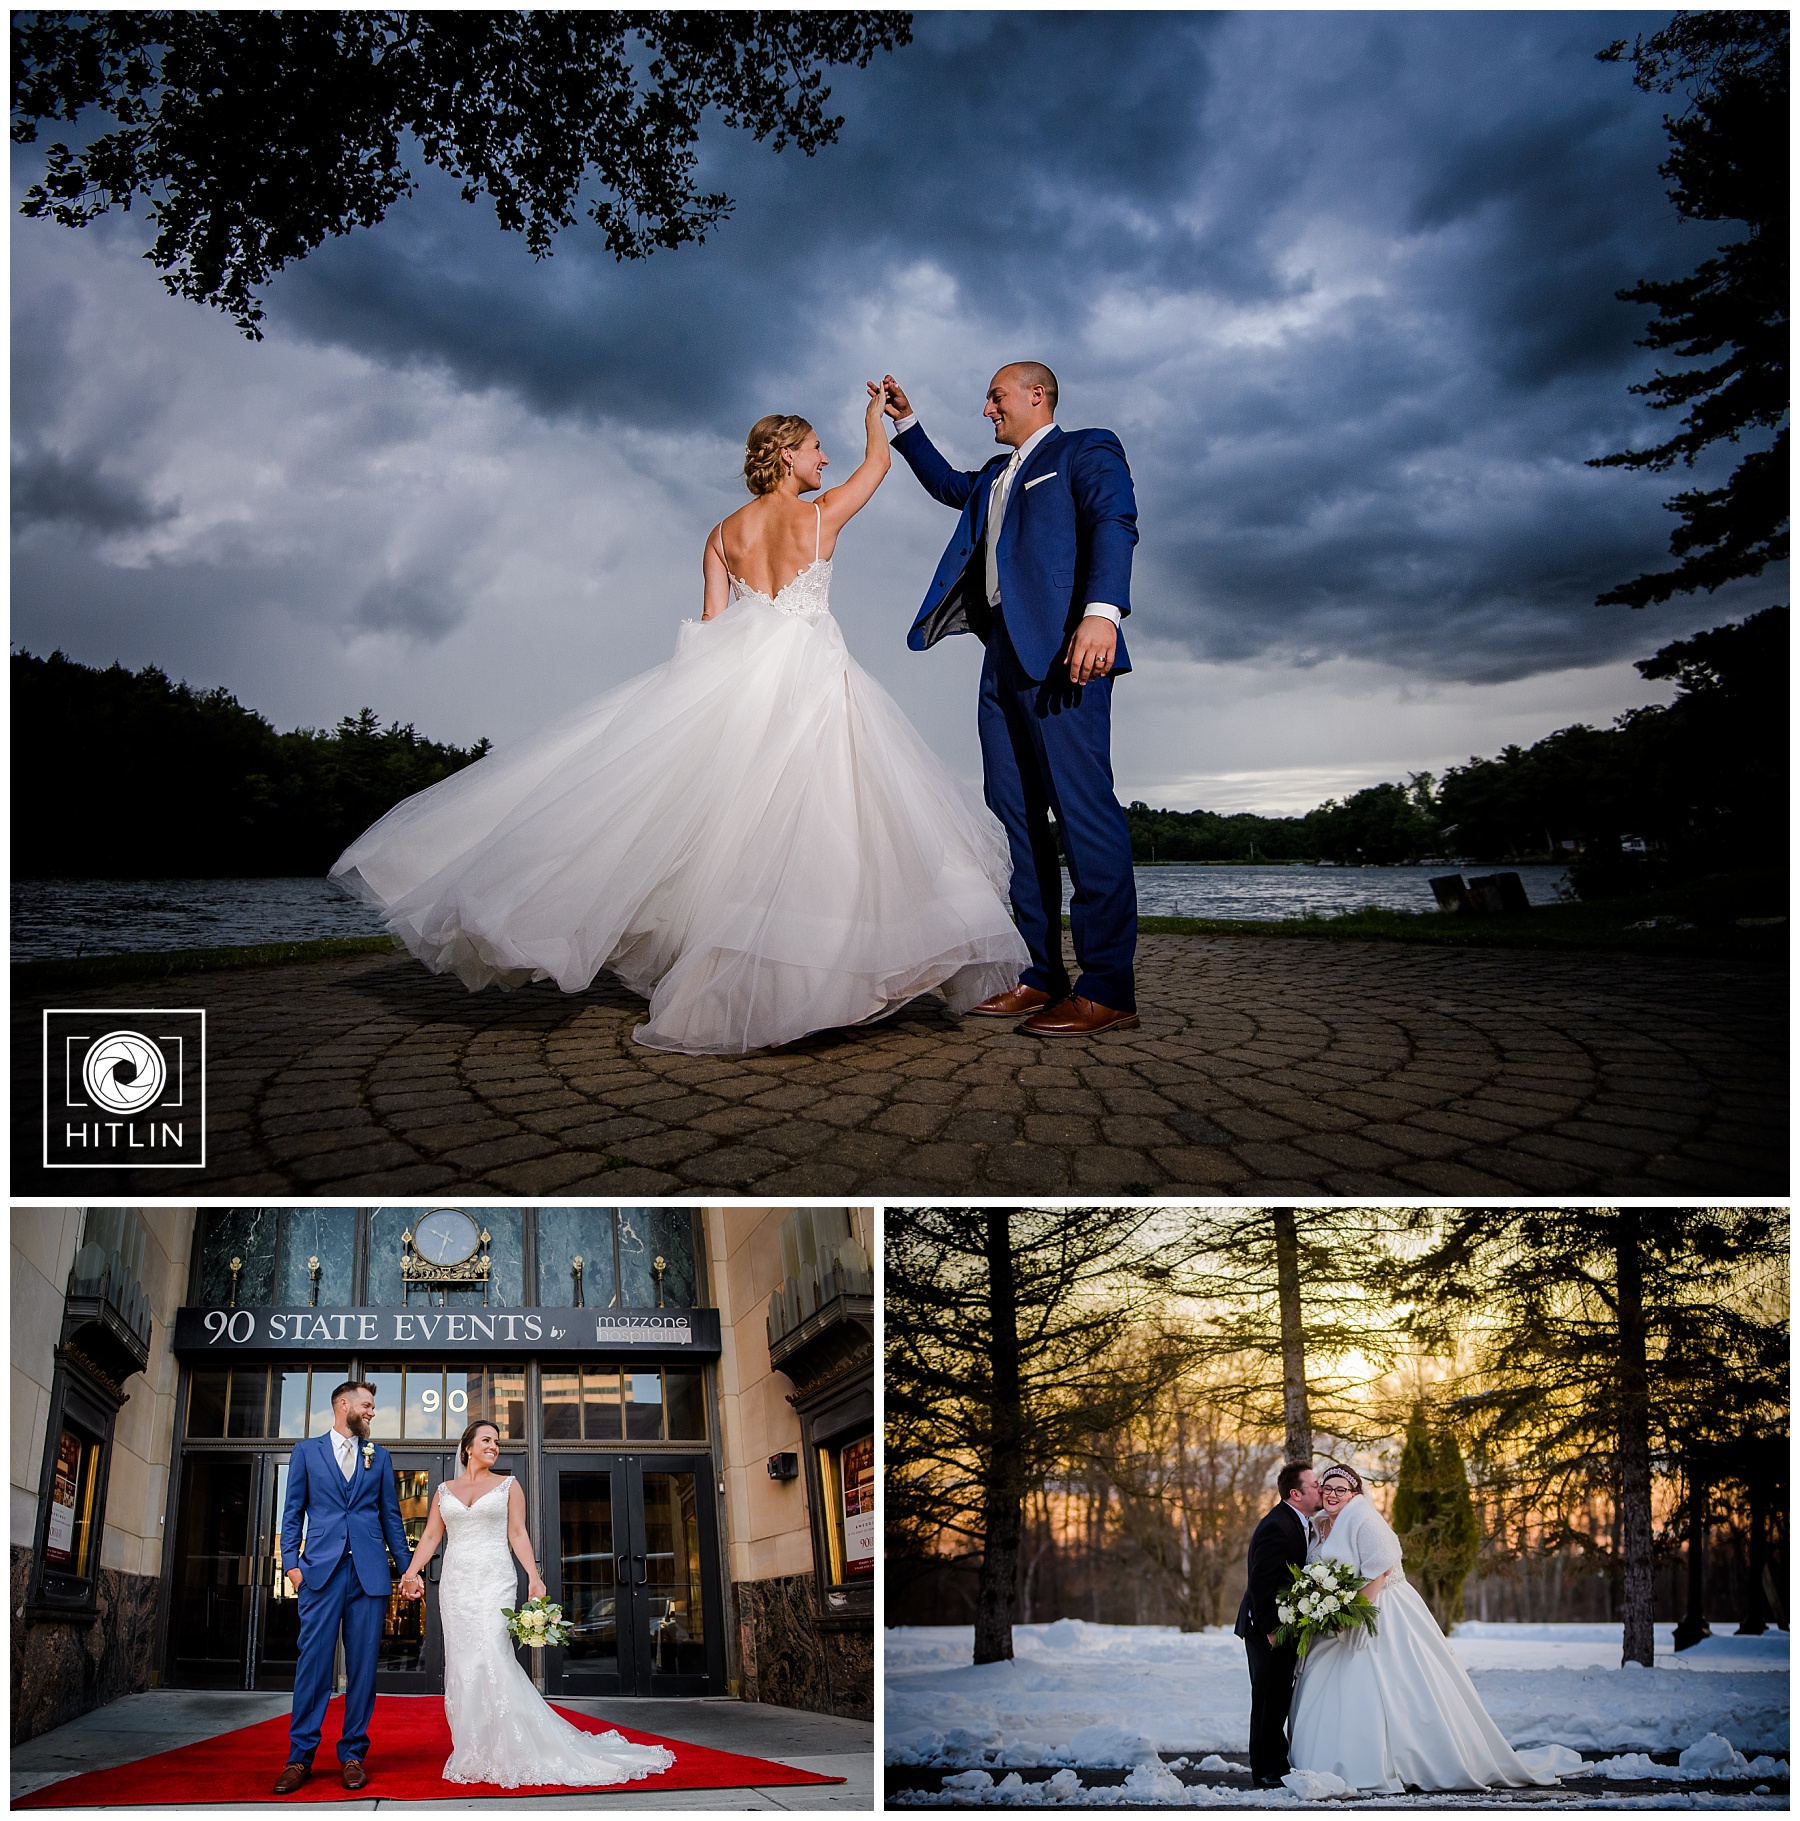 Winner of 2019 Hitlin Photography Inc. Wedding Couple of the Year